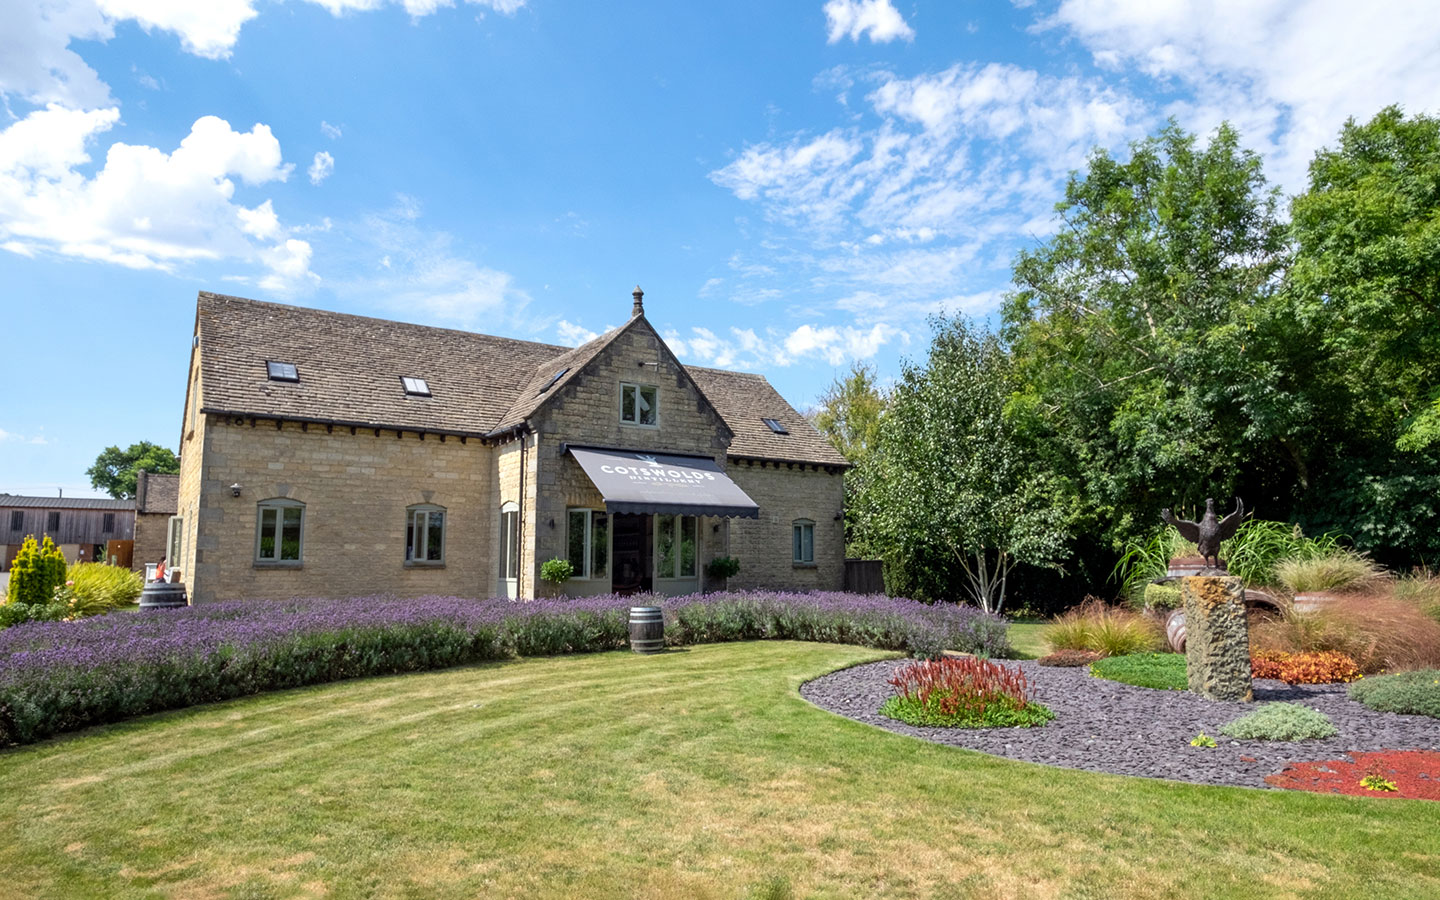 The Cotswolds Distillery in Shipston-on-Stour